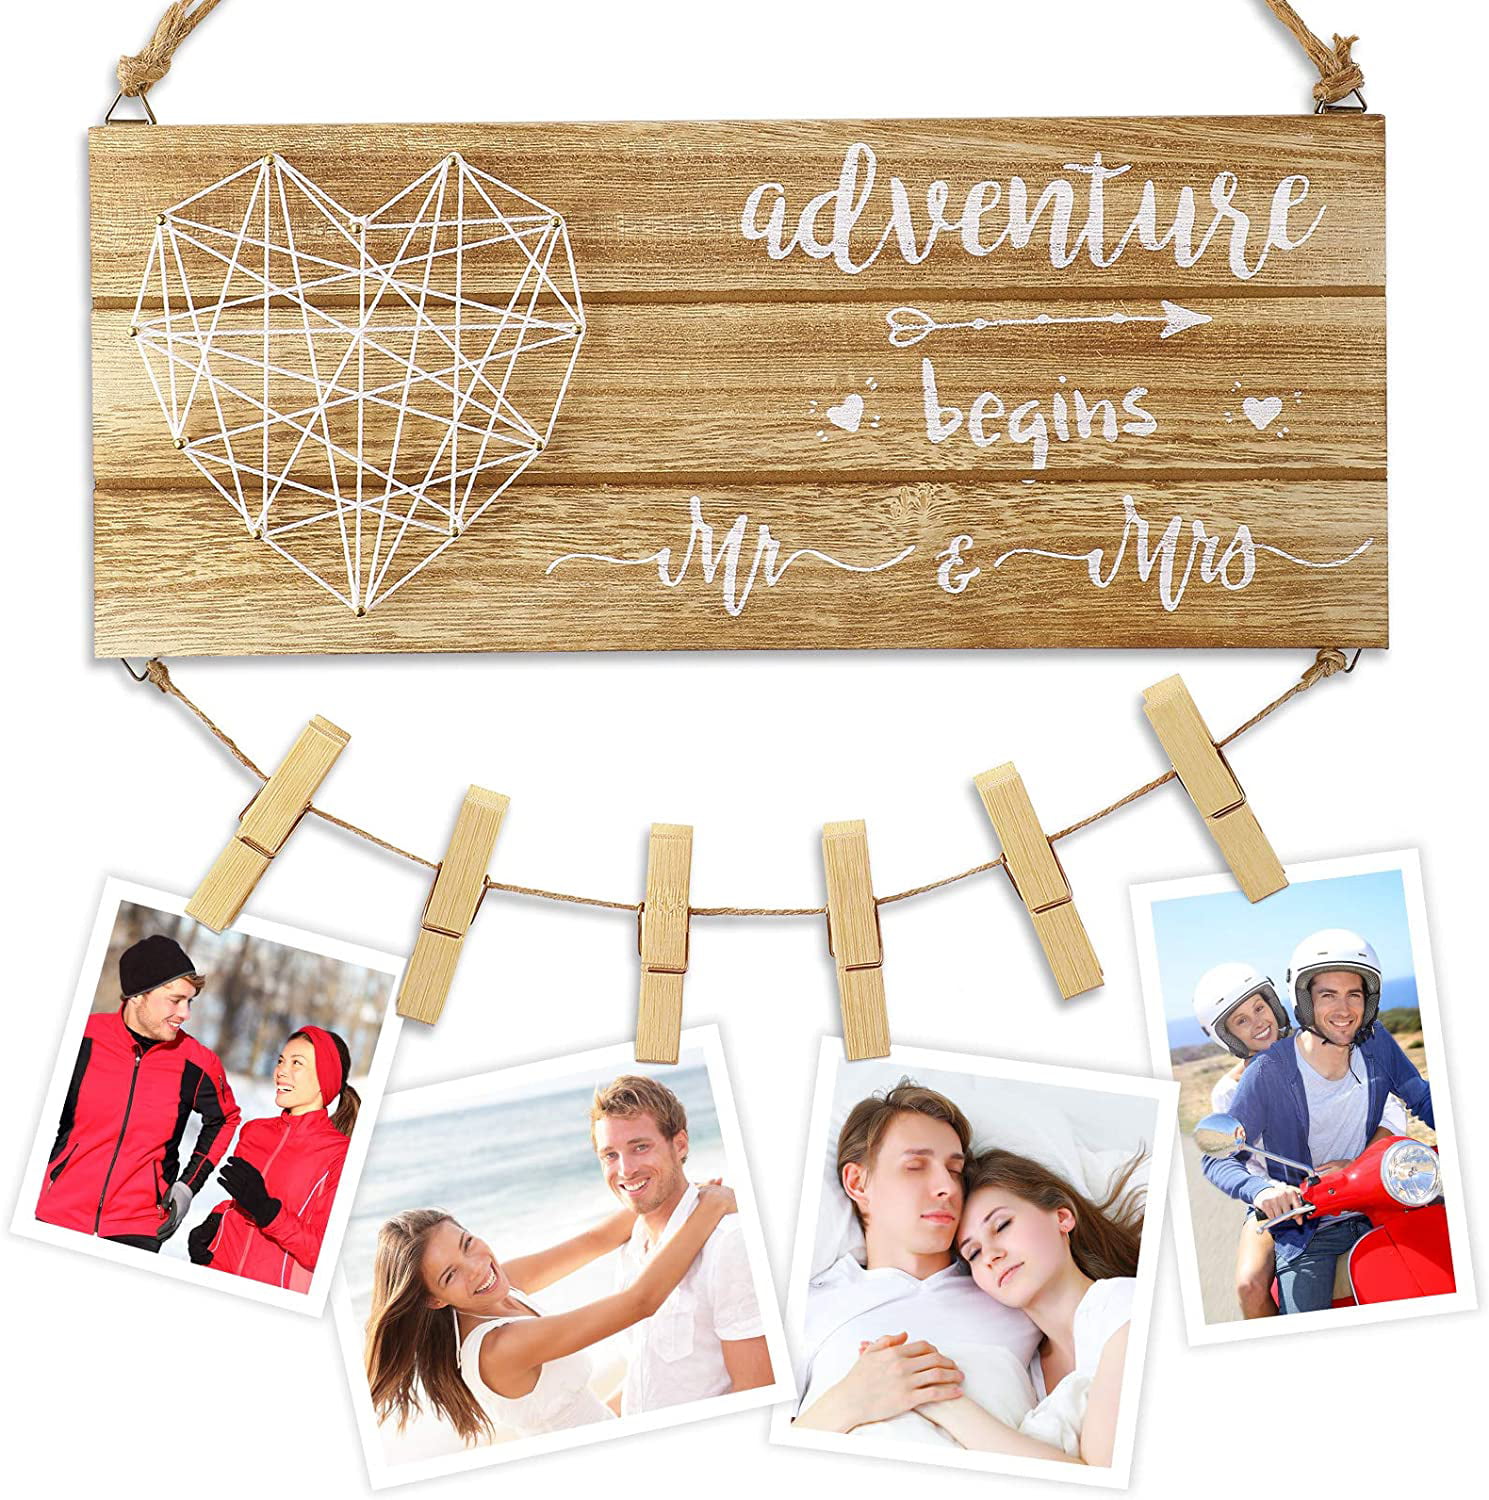 LET the ADVENTURE BEGIN frame with clip